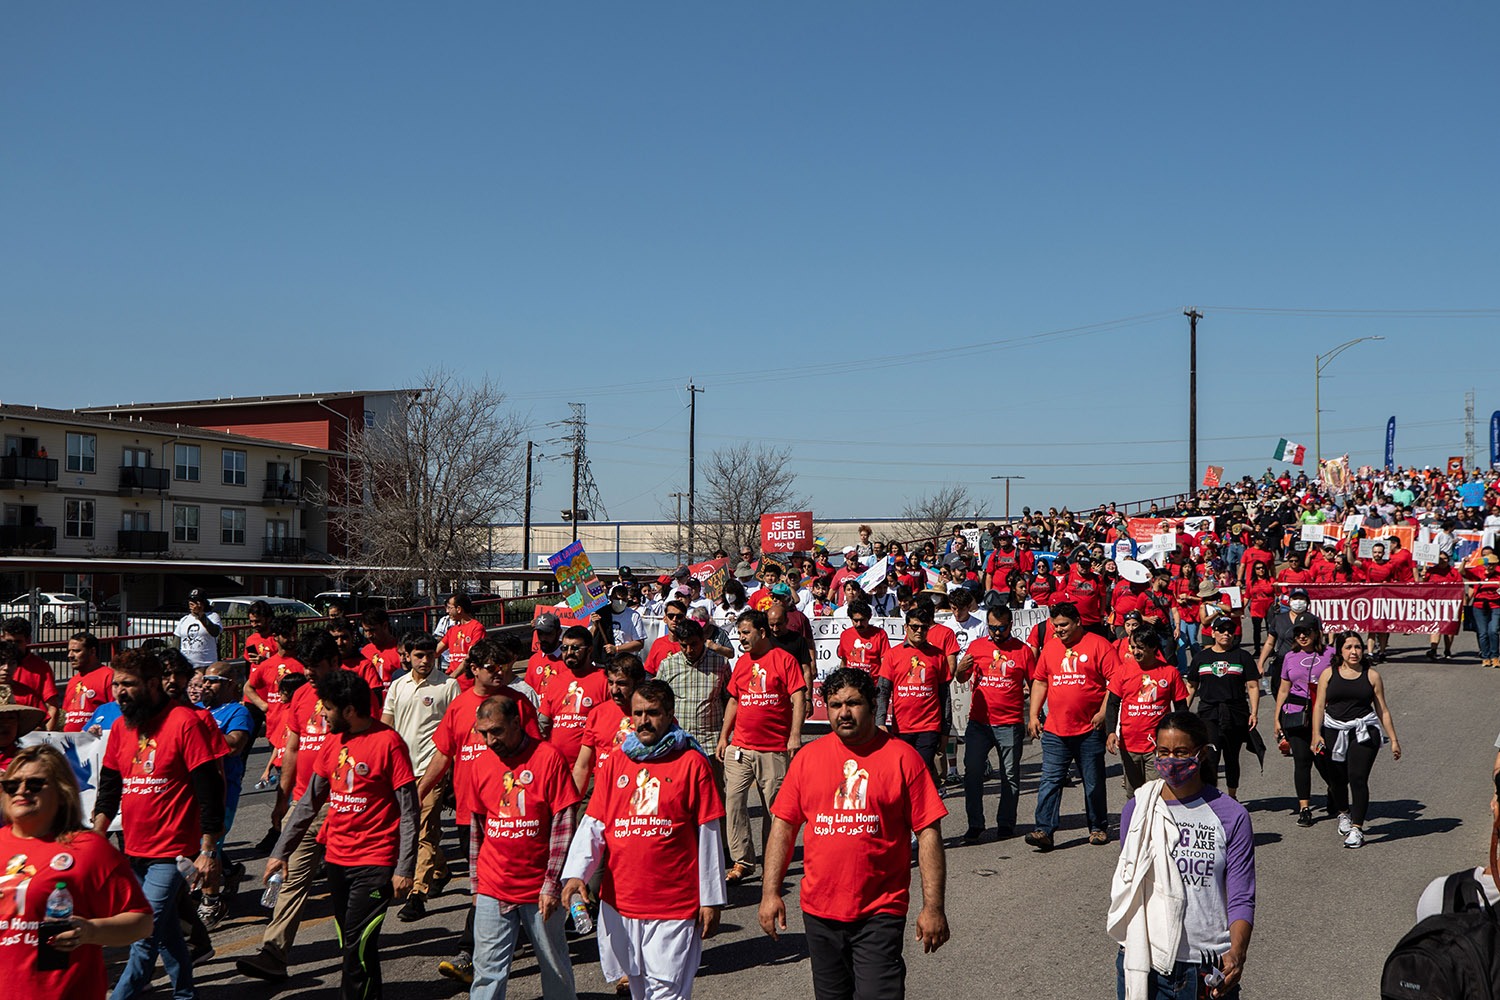 Thousands of people, including a couple dozen raising awareness about the disappearance of Lina Khil, march in the 26th annual Cesar E. Chavez March for Justice through downtown San Antonio, Texas, on Saturday, March 26, 2022. Photo by Kaylee Greenlee Beal | Heron contributor